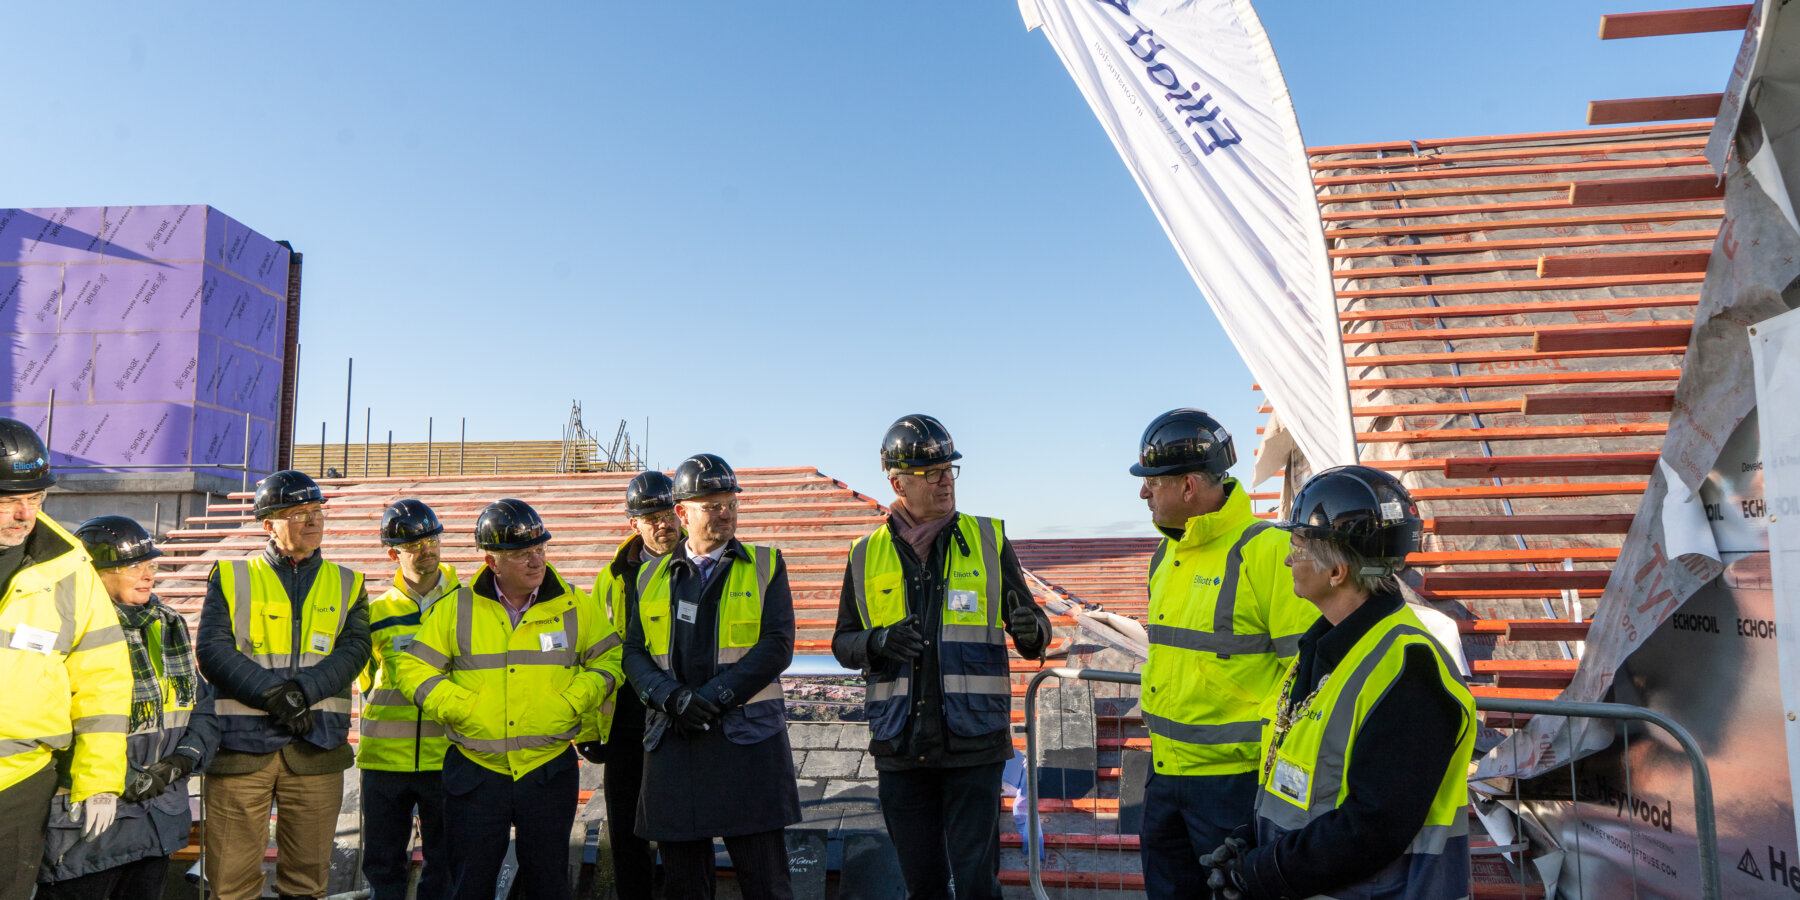 The Wyldewoods, Chester Elliott Group Topping Out Feature Image